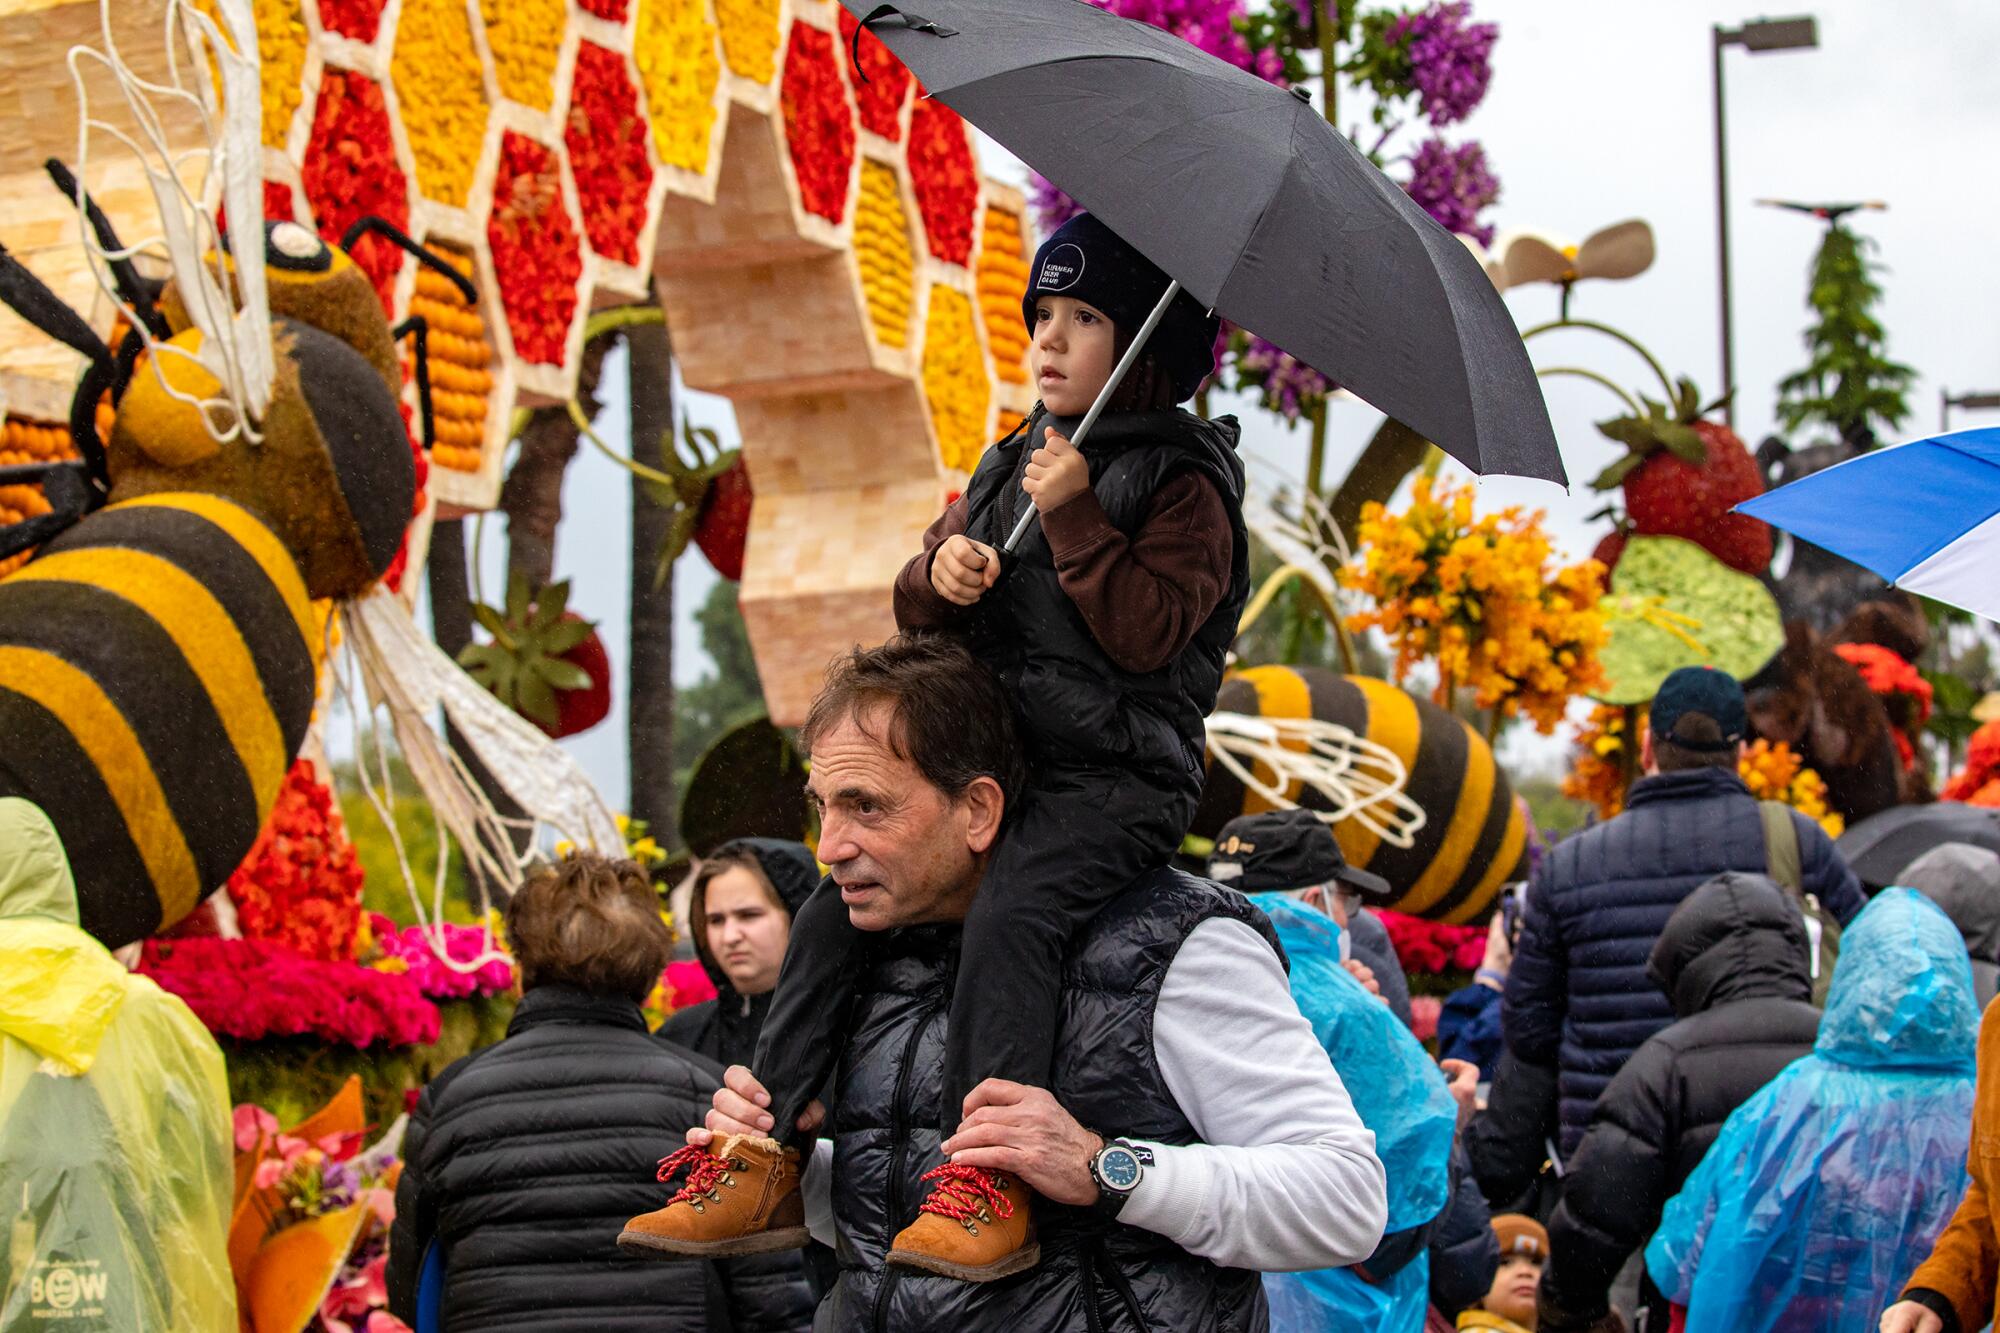 Dad with a son on his shoulders holding an umbrella in a crowd